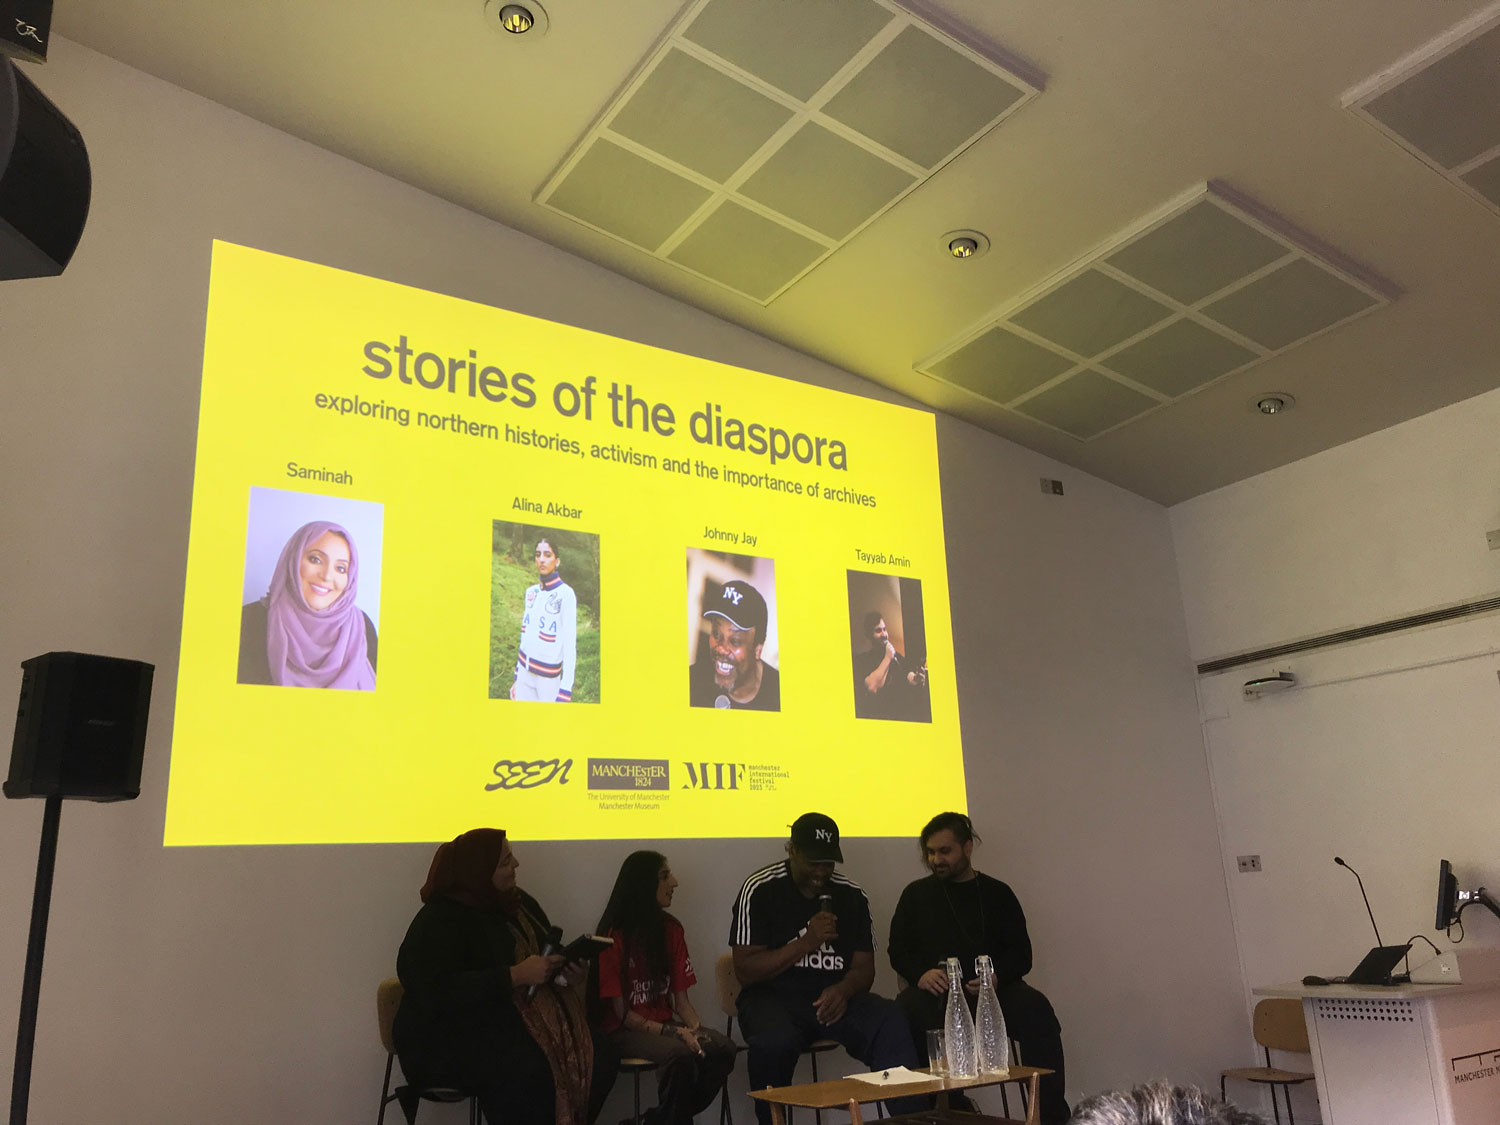 The panel for the Stories of the Diaspora discussion